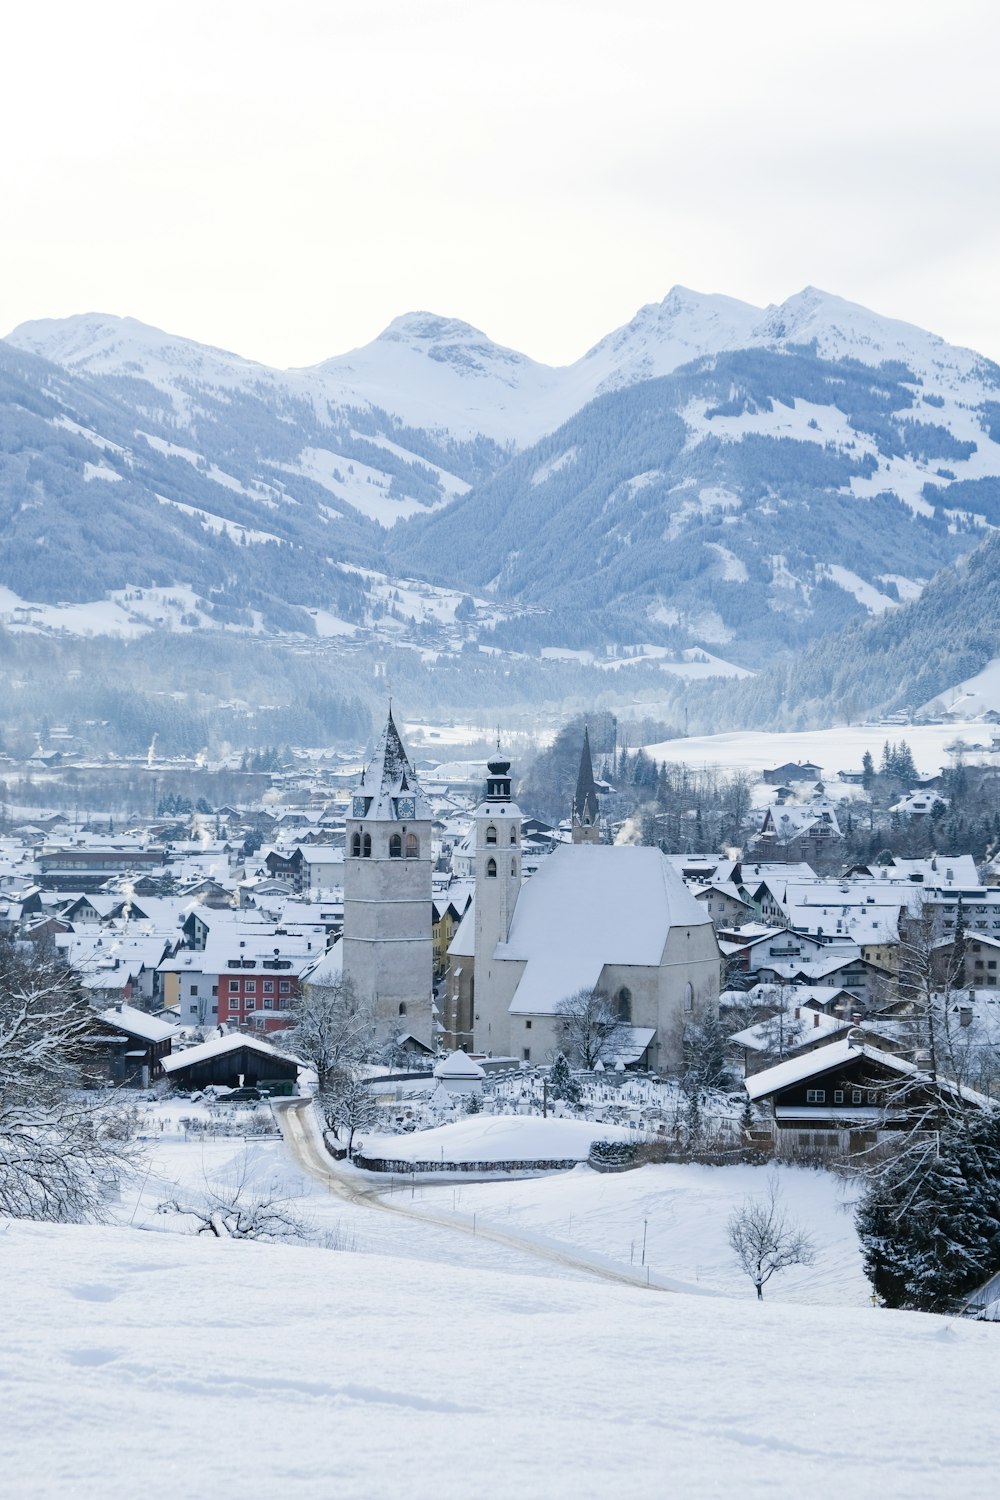 a snowy town with a church and mountains in the background